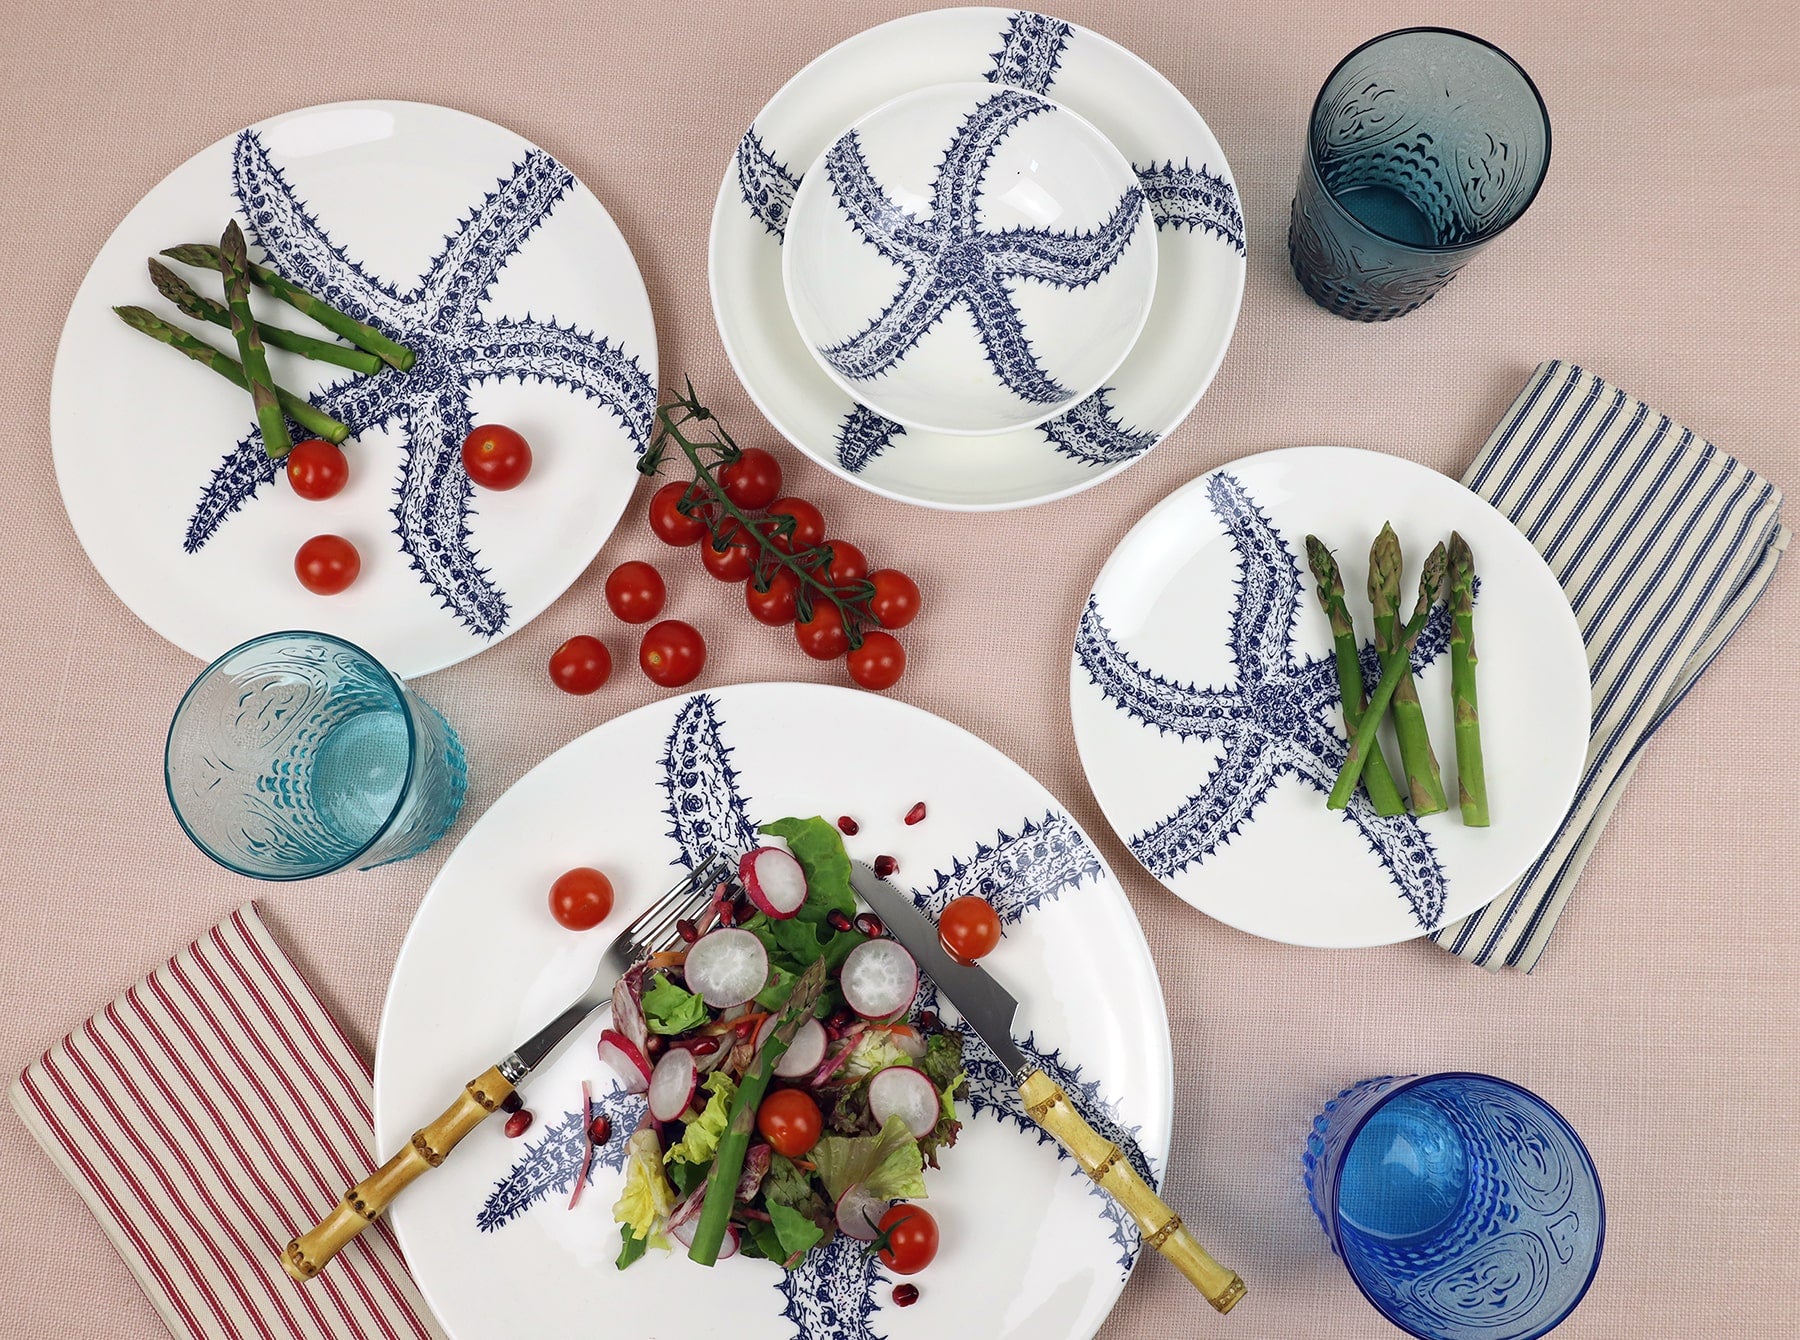 Aerial view of Starfish plate on a soft pink tablecloth.On the plate is a radish salad with Bamboo cutlery,to the side are stripe napkins,a glass and other tableware in the Starfish design.